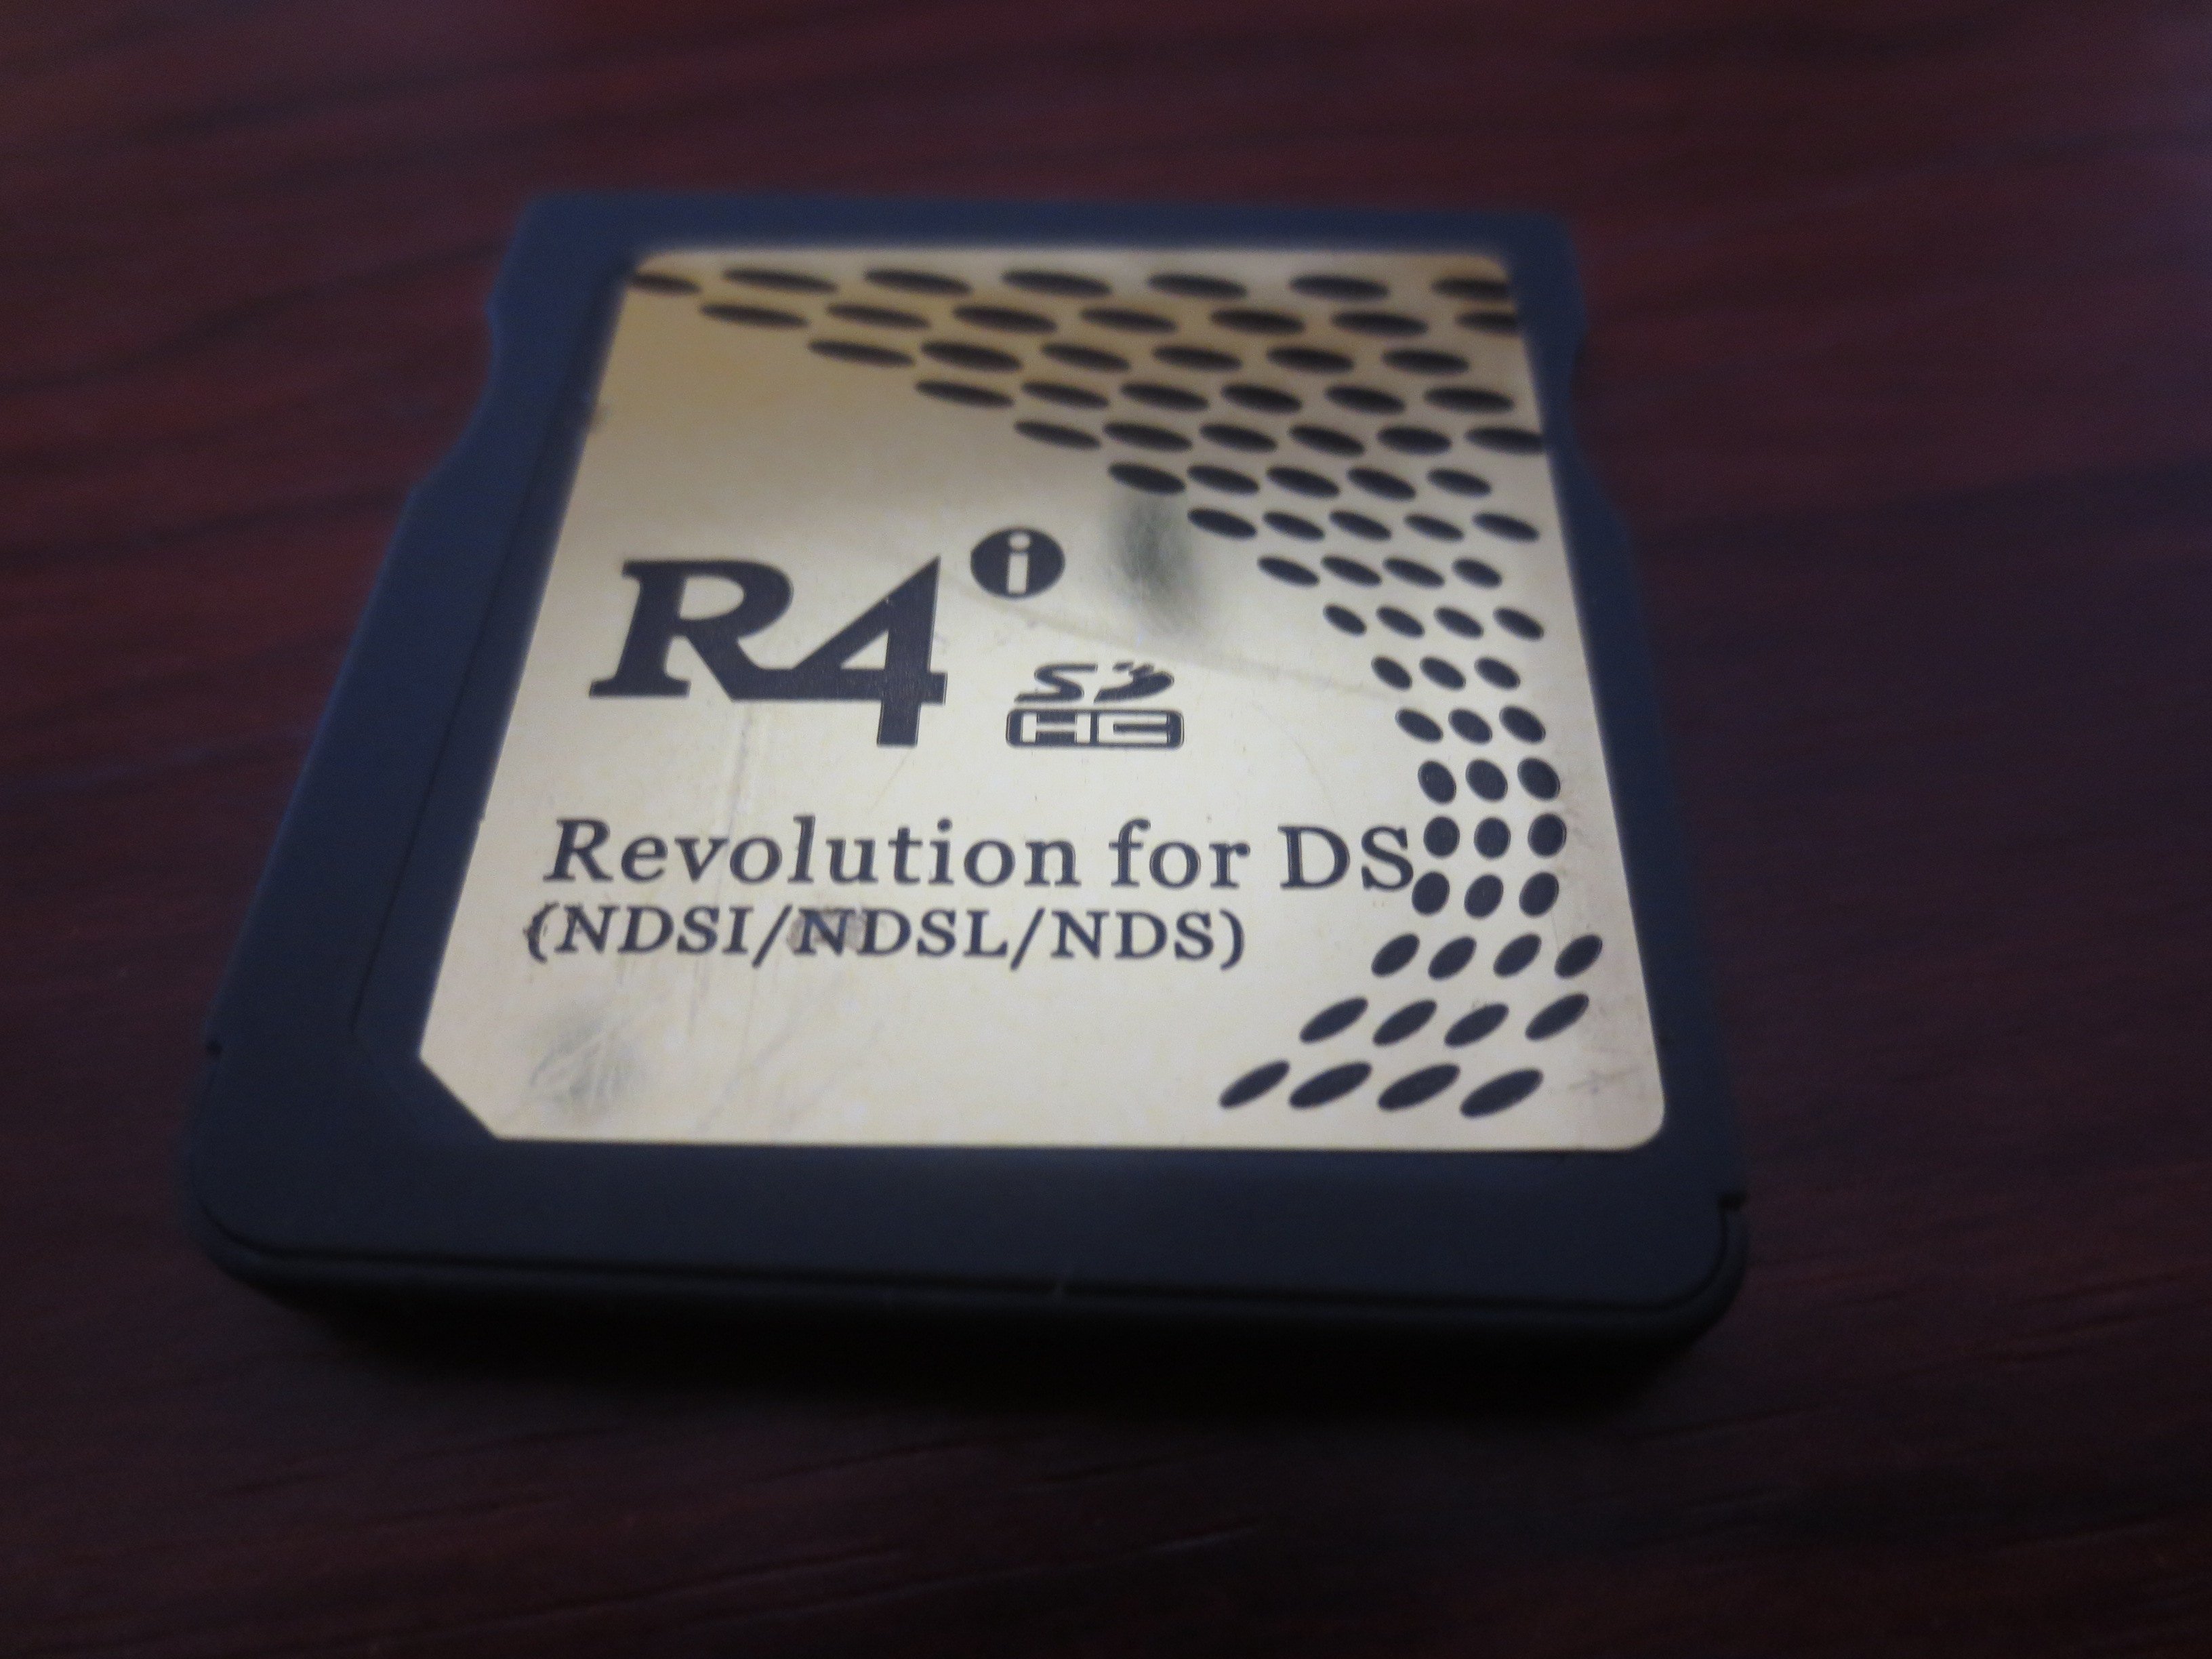 R4i SDHC Revolution for DS (NDSI/NDSL/NDS) | GBAtemp.net - The Independent  Video Game Community